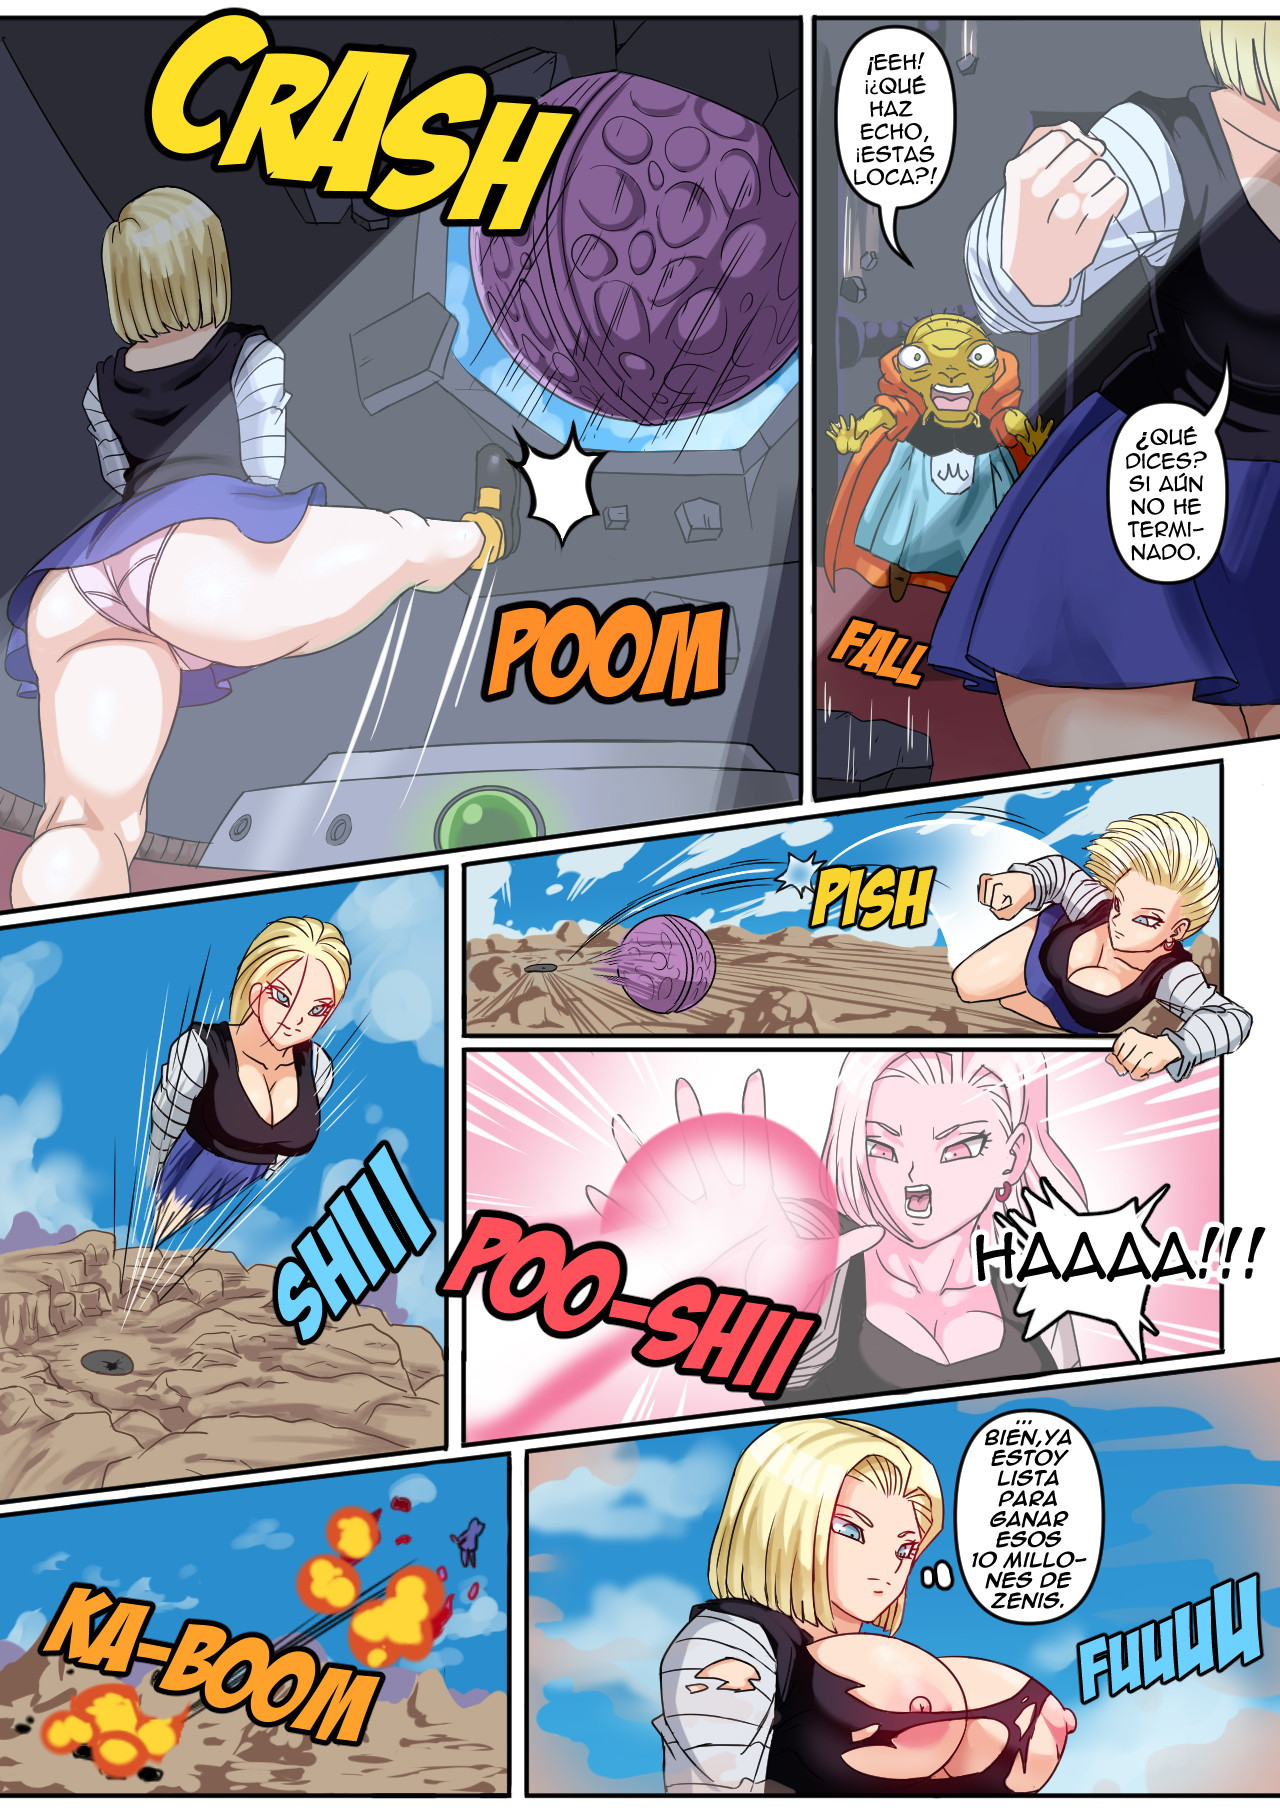 [Pink Pawg] Android 18 NTR Ep.3 - 27